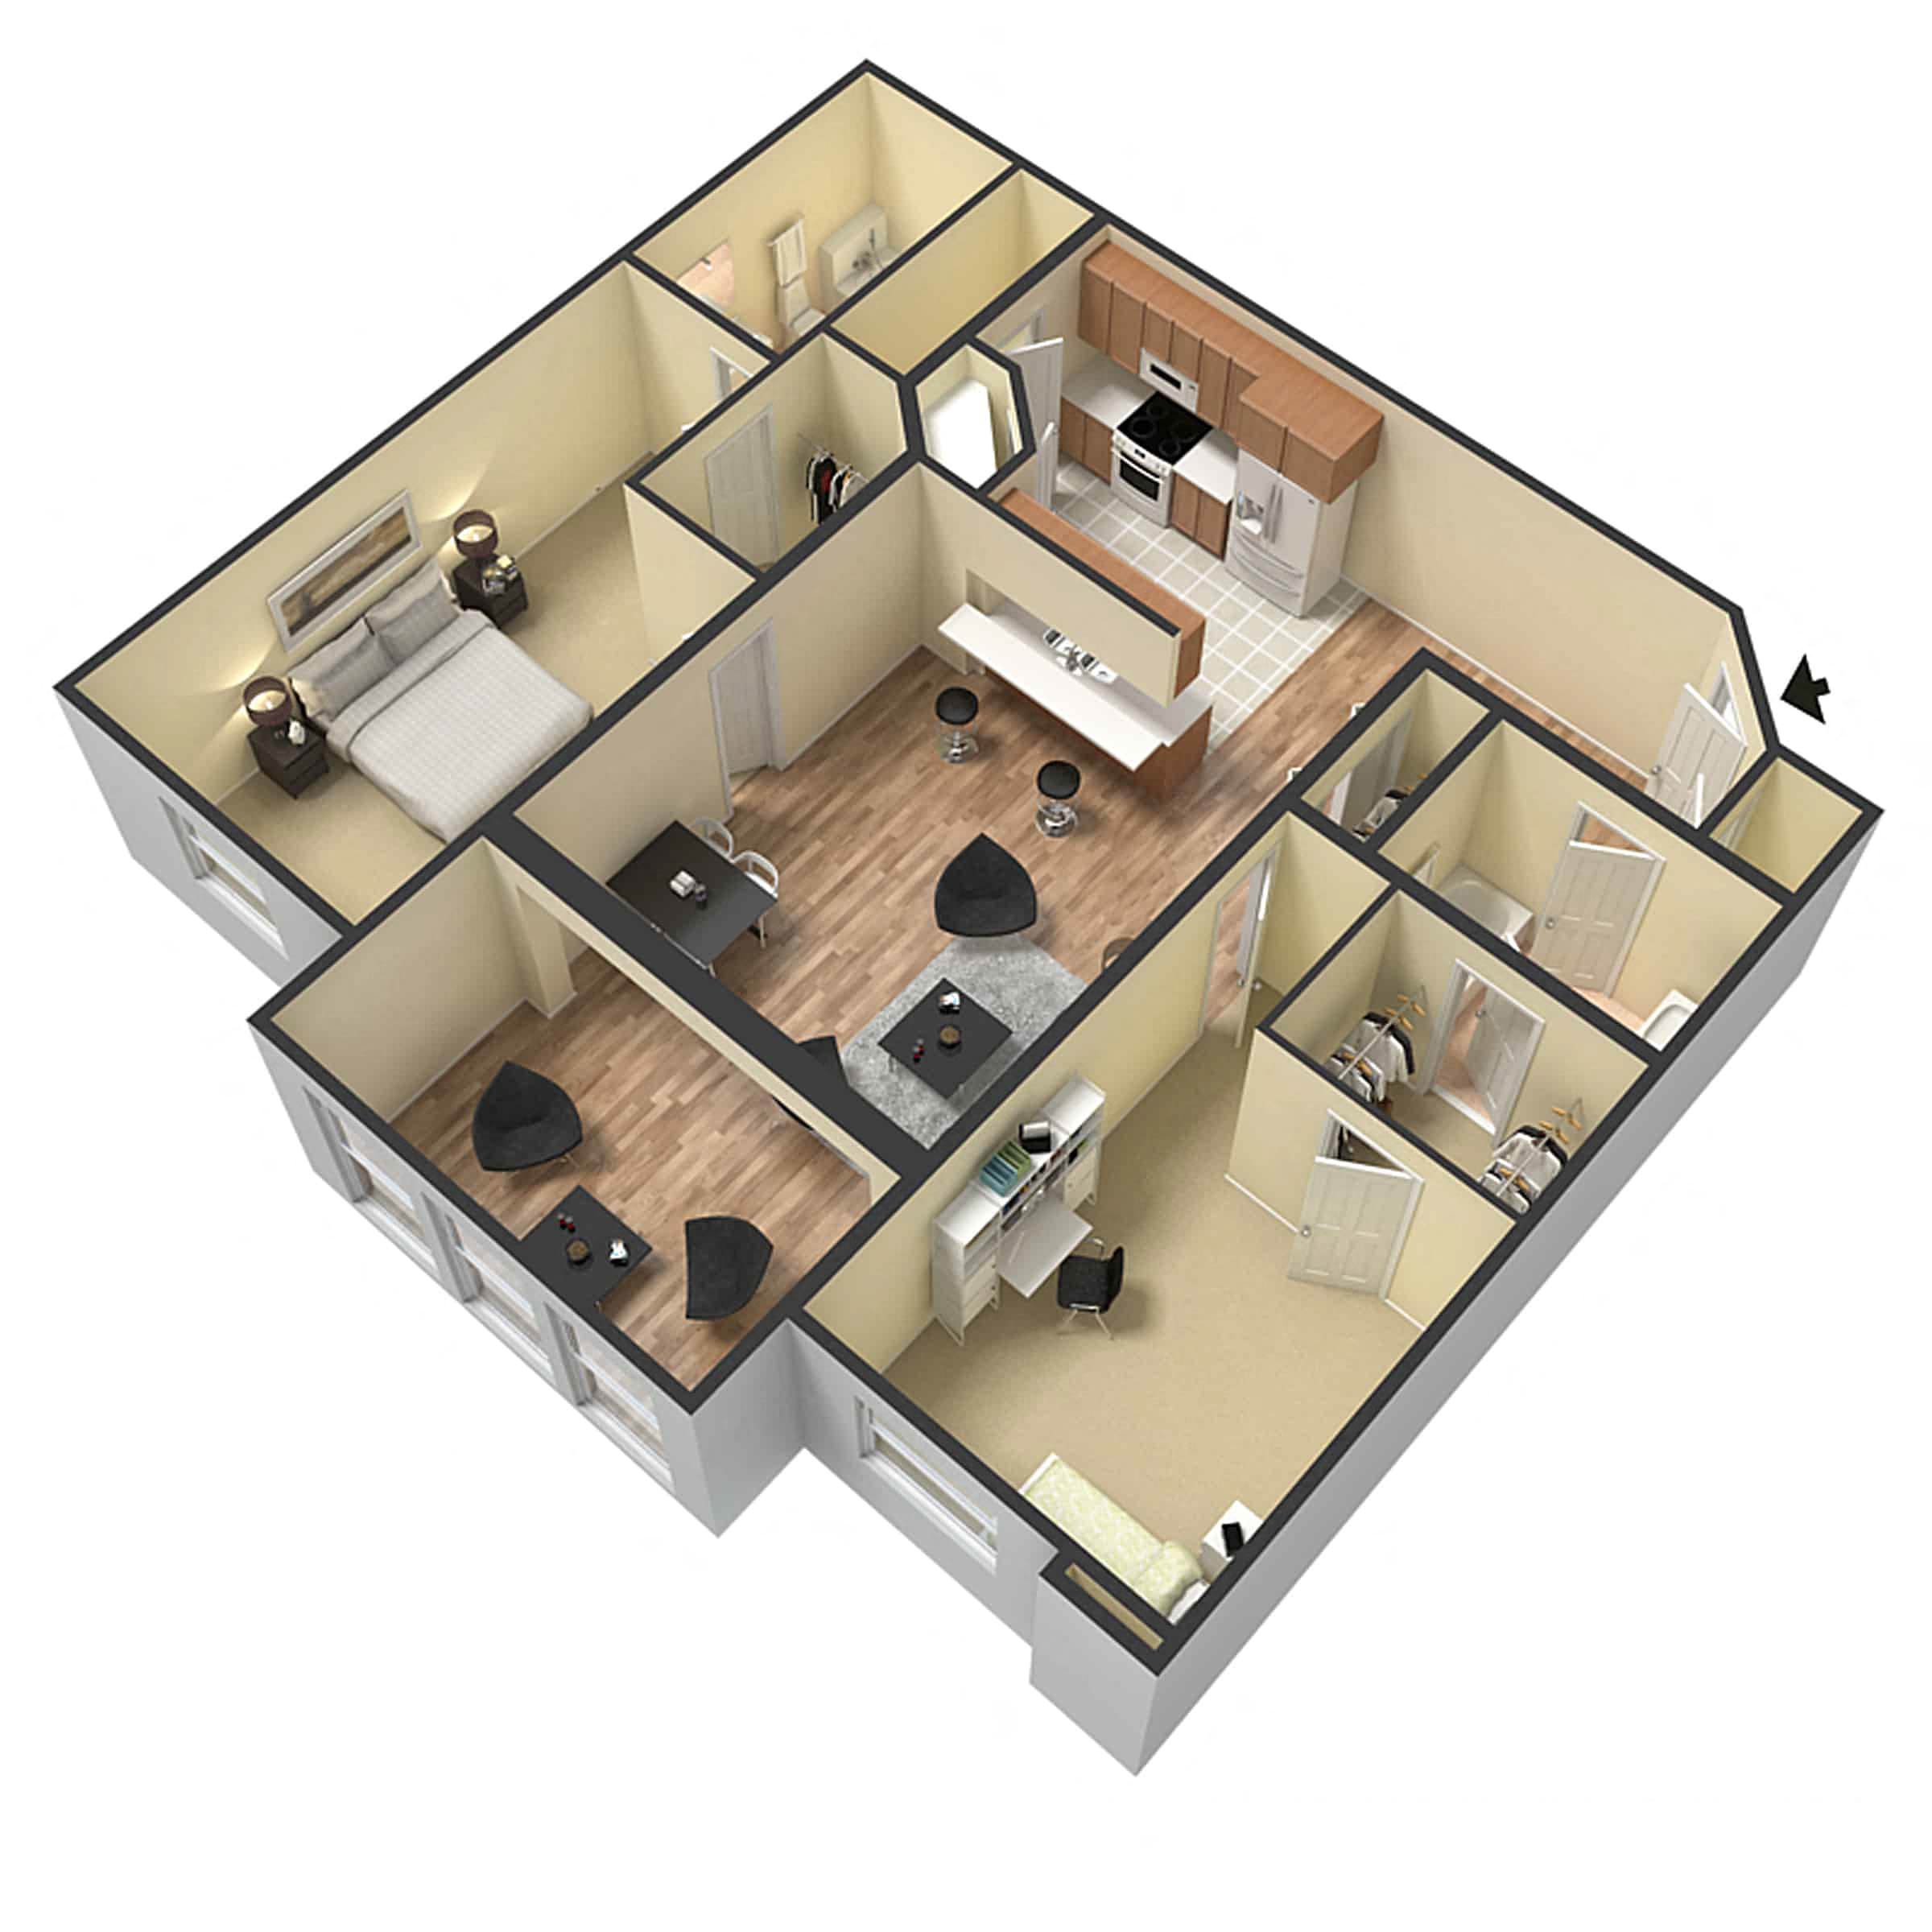 View Our 1 & 2 Bedroom Apartment Floor Plans Homestead